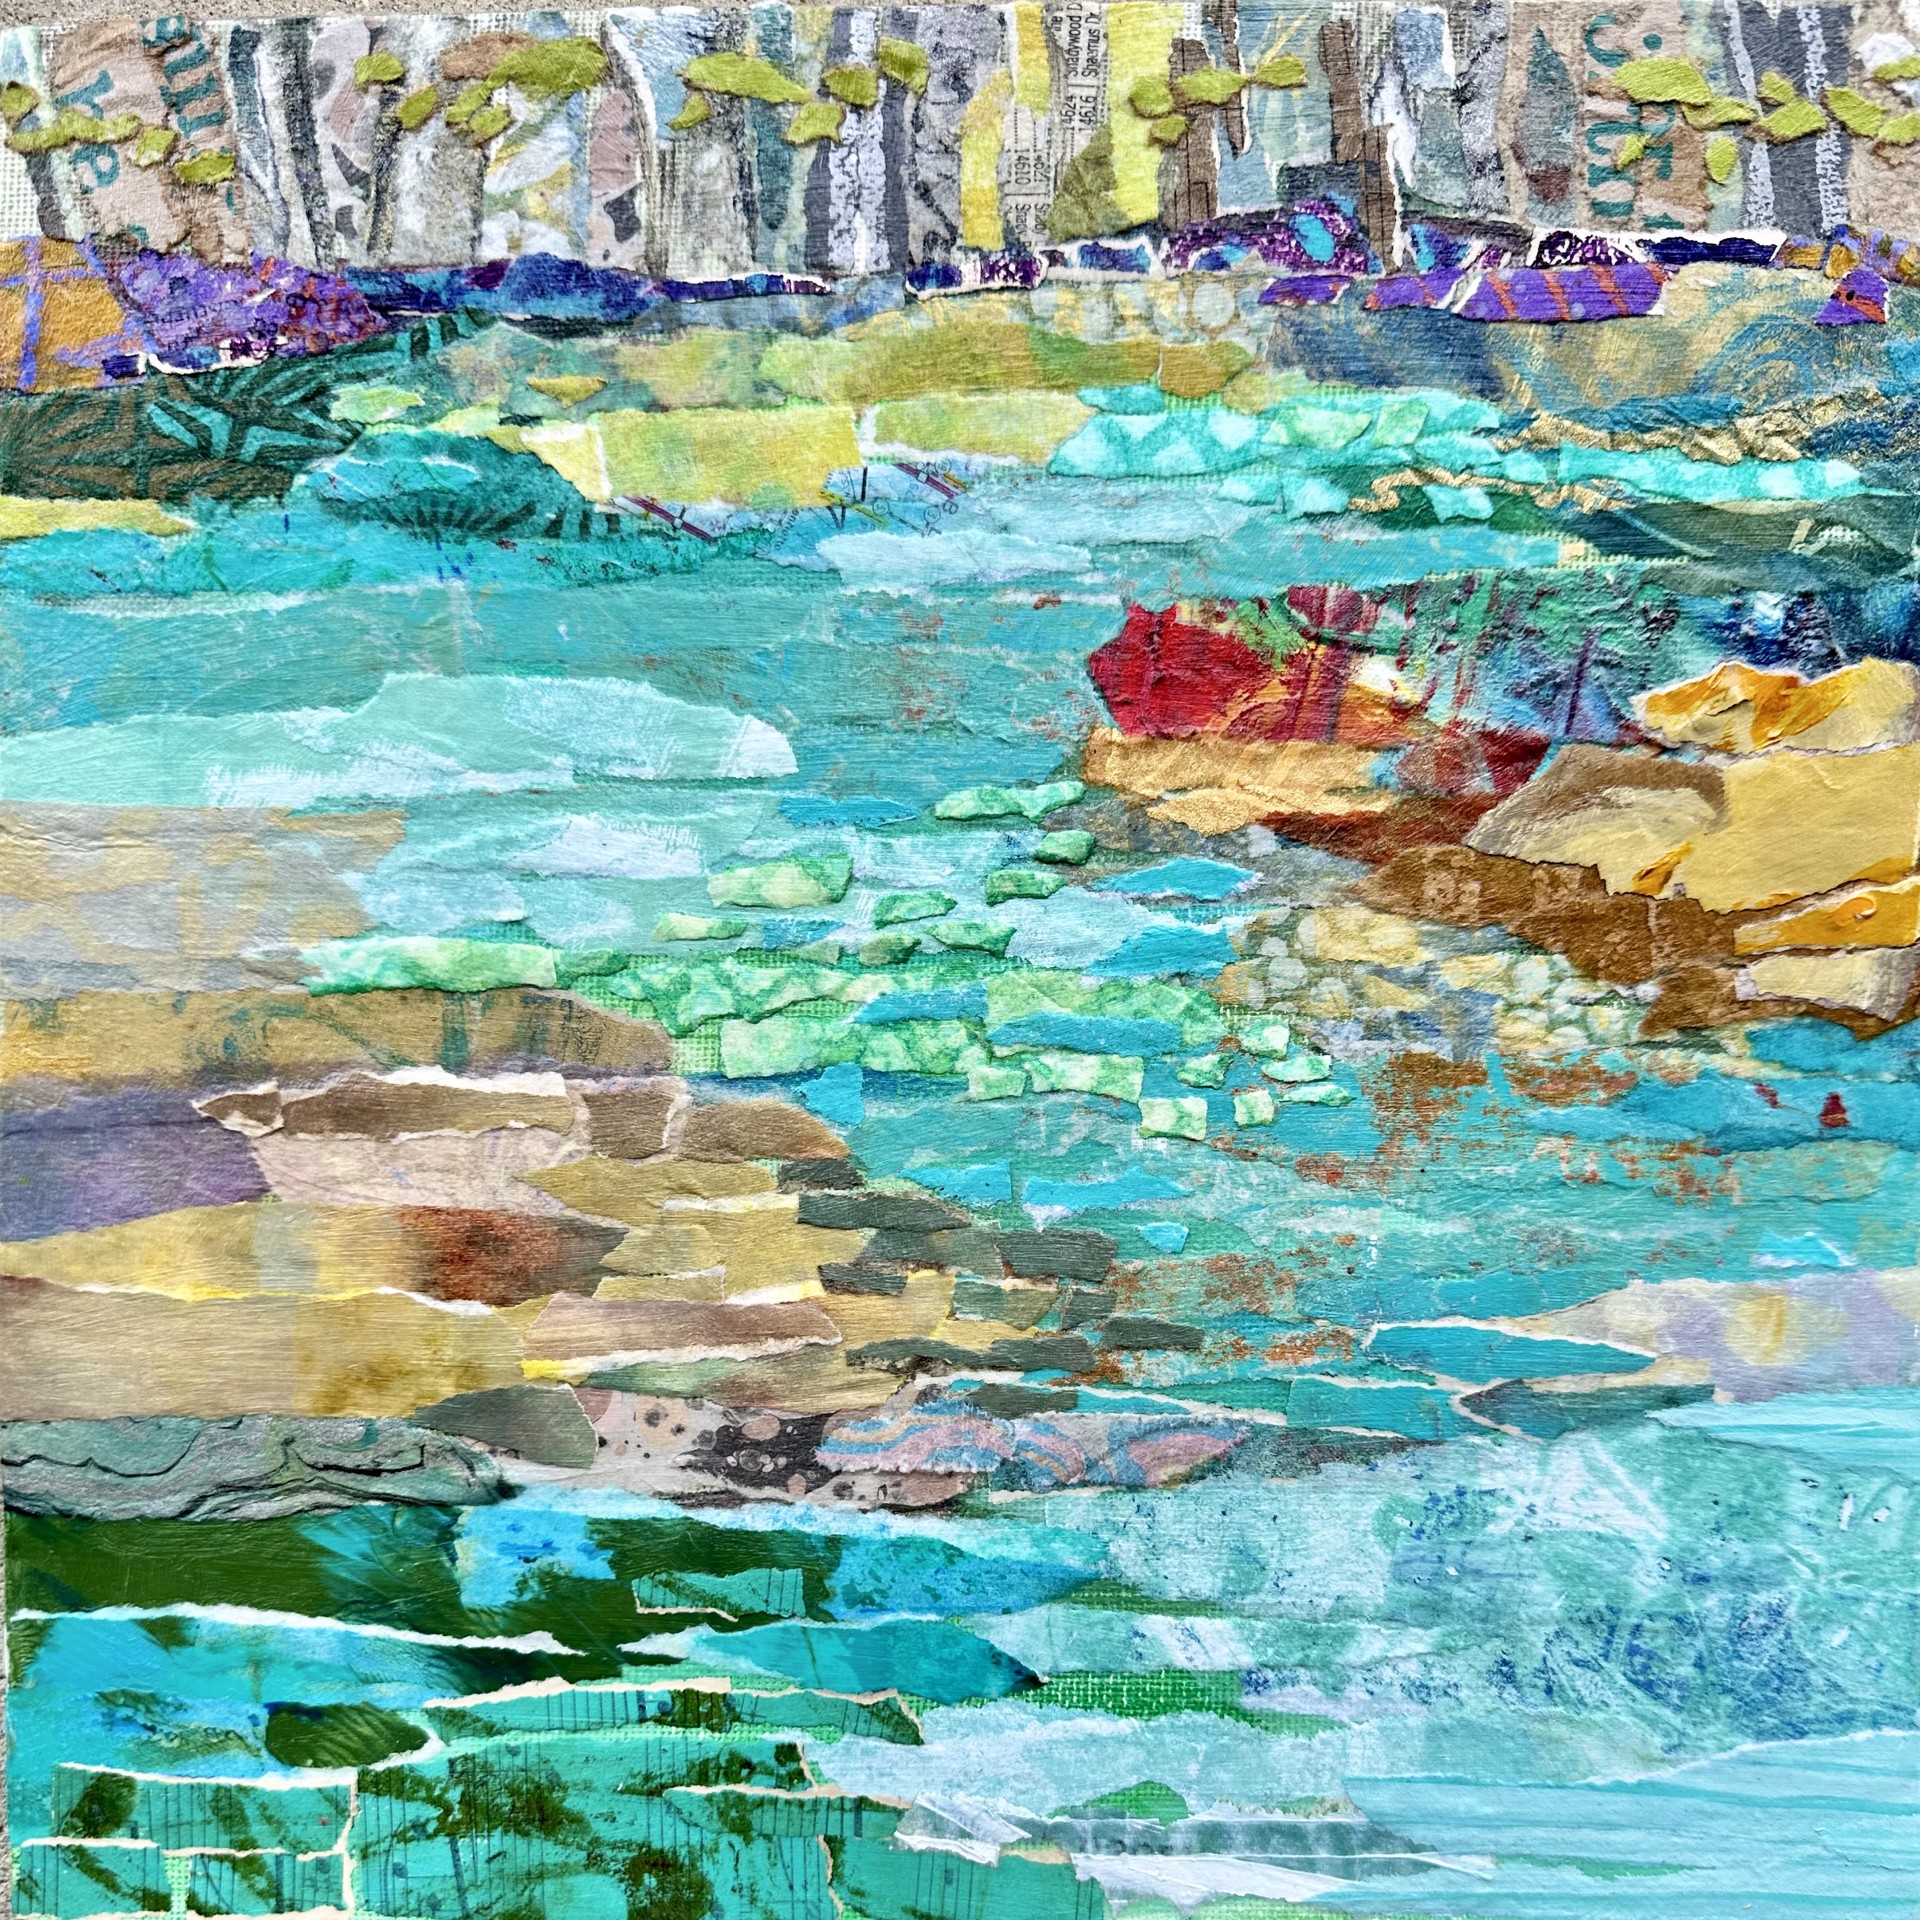 Teal Abstraction - SOLD by Elizabeth St. Hilaire